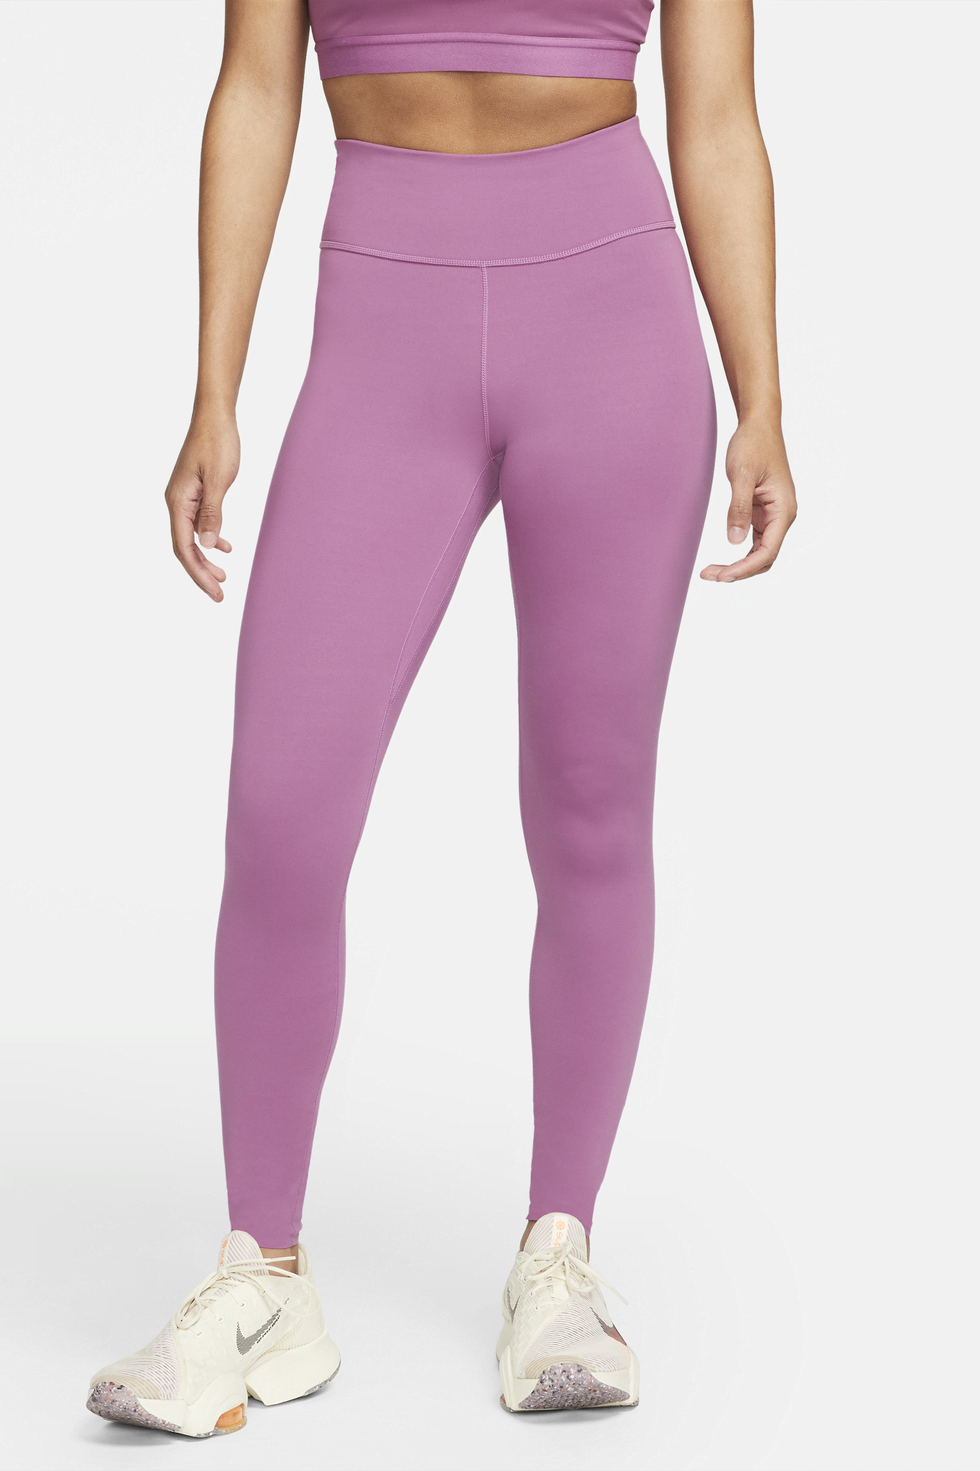 Nike All Over logo cropped pink and green capri leggings